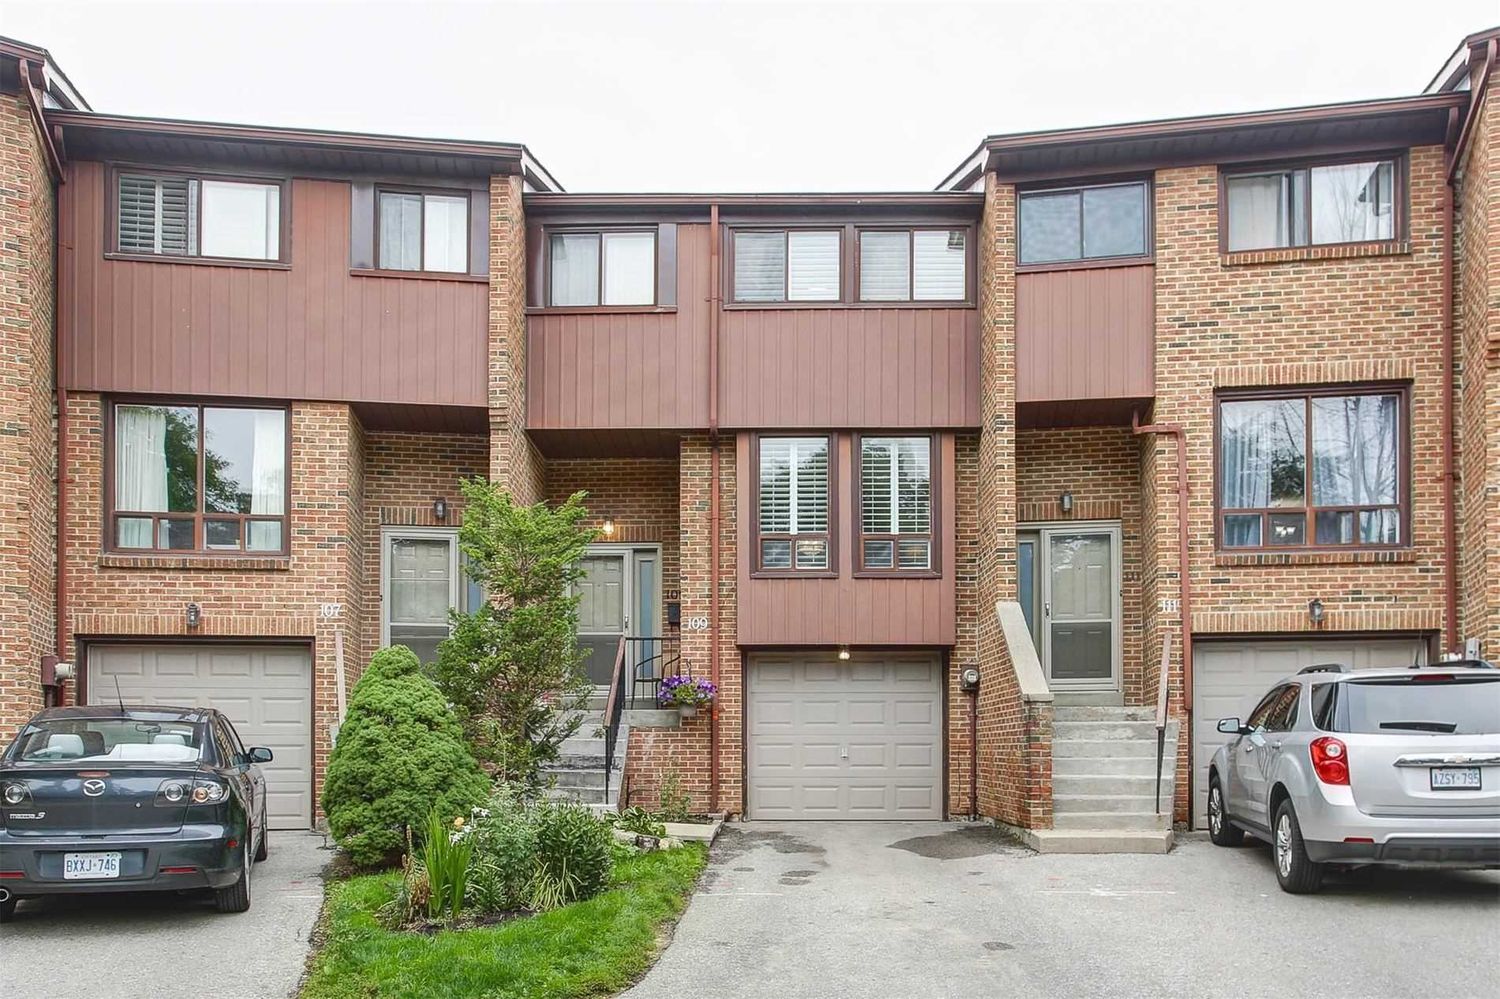 1-130 Wagon Trailway. 1 Wagon Trailway Townhouses is located in  North York, Toronto - image #1 of 2